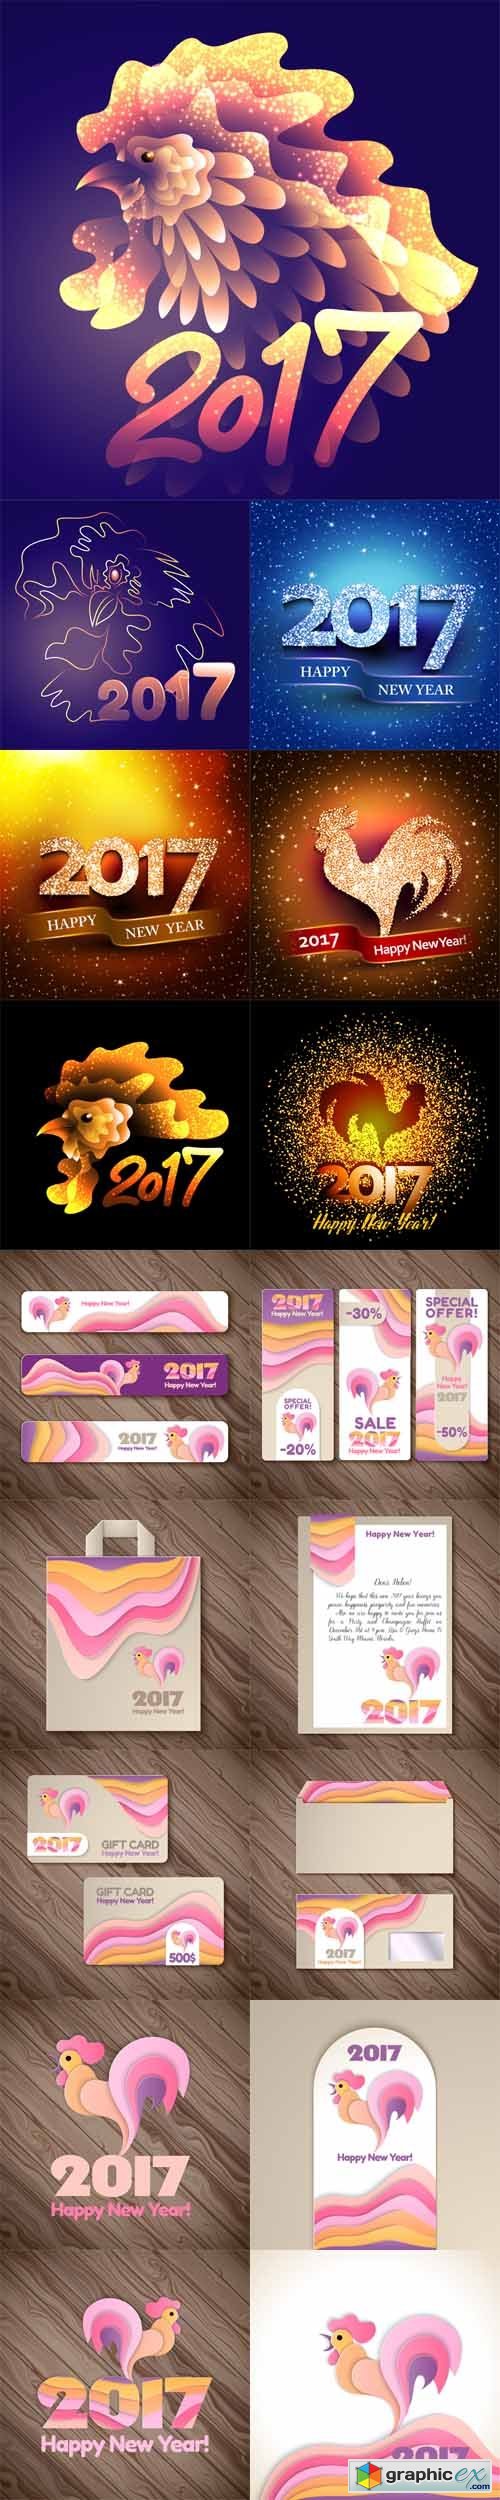 Happy New Year with Rooster Symbol of 2017